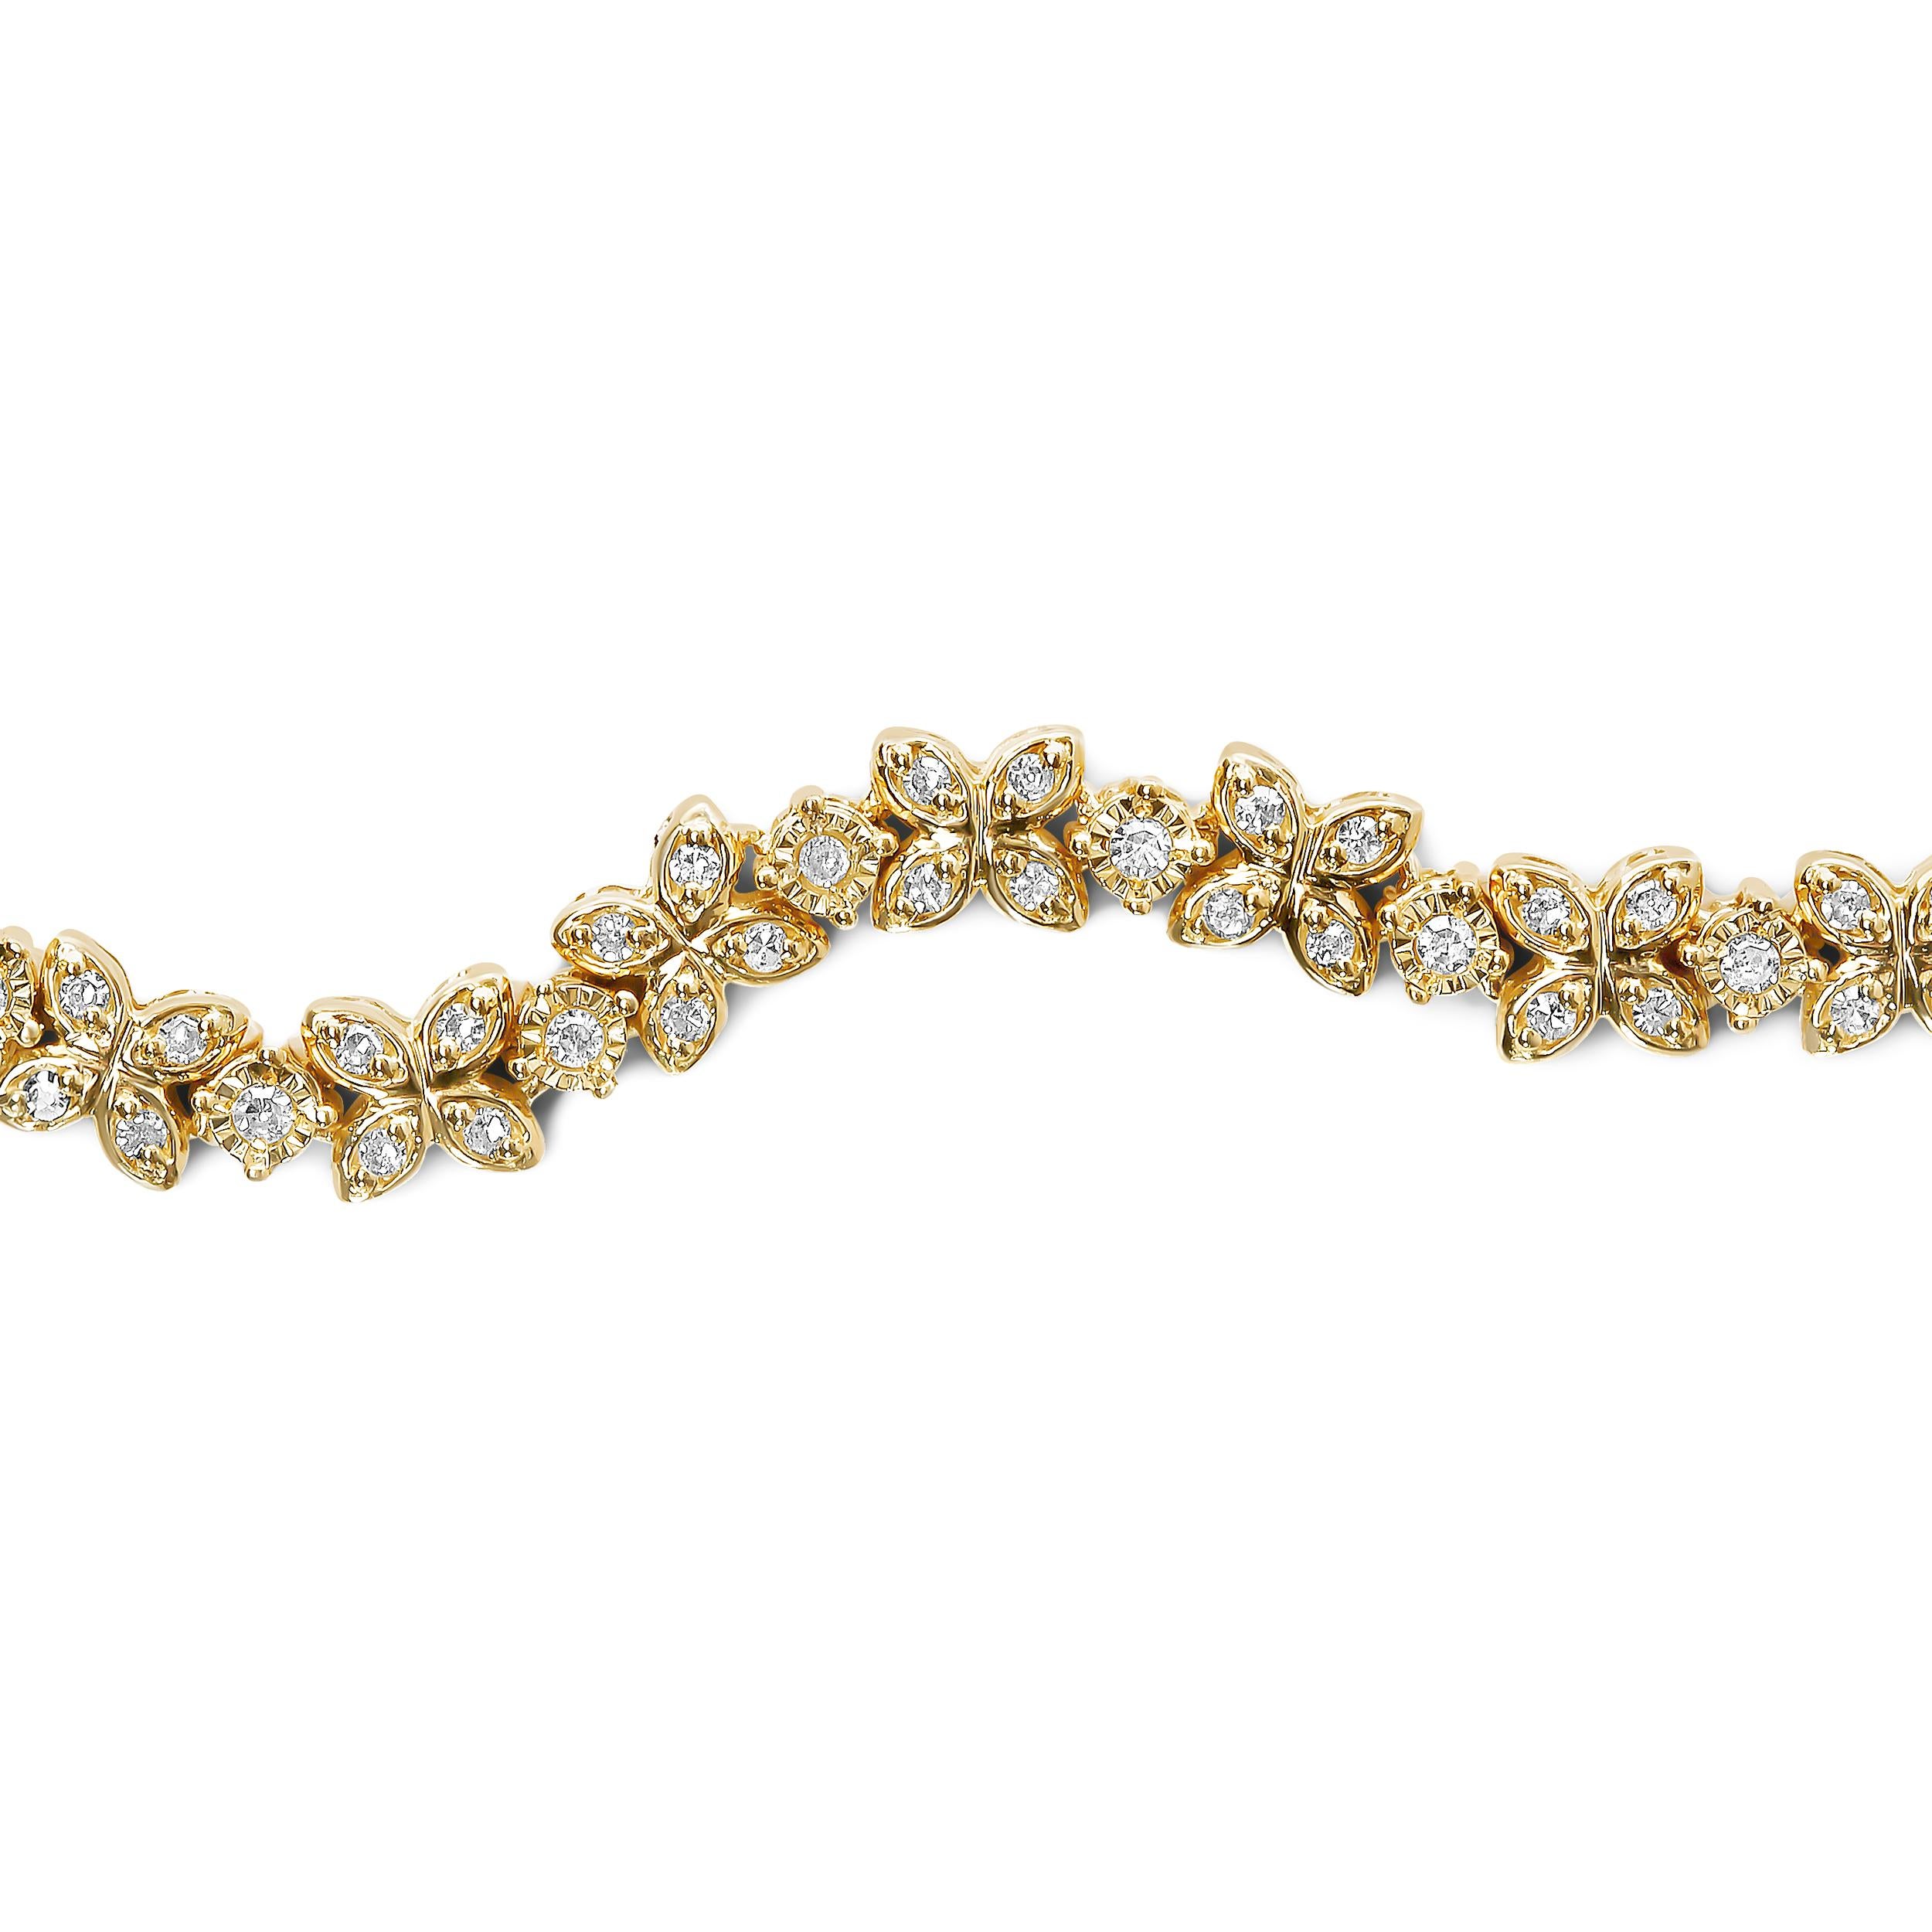 Indulge in the ultimate luxury with this stunning 18K yellow gold plated .925 sterling silver bolo bracelet, adorned with 34 round diamonds totaling 1/4 cttw. The natural diamonds have an I-J color and I1-I2 clarity, perfectly set in both prong and